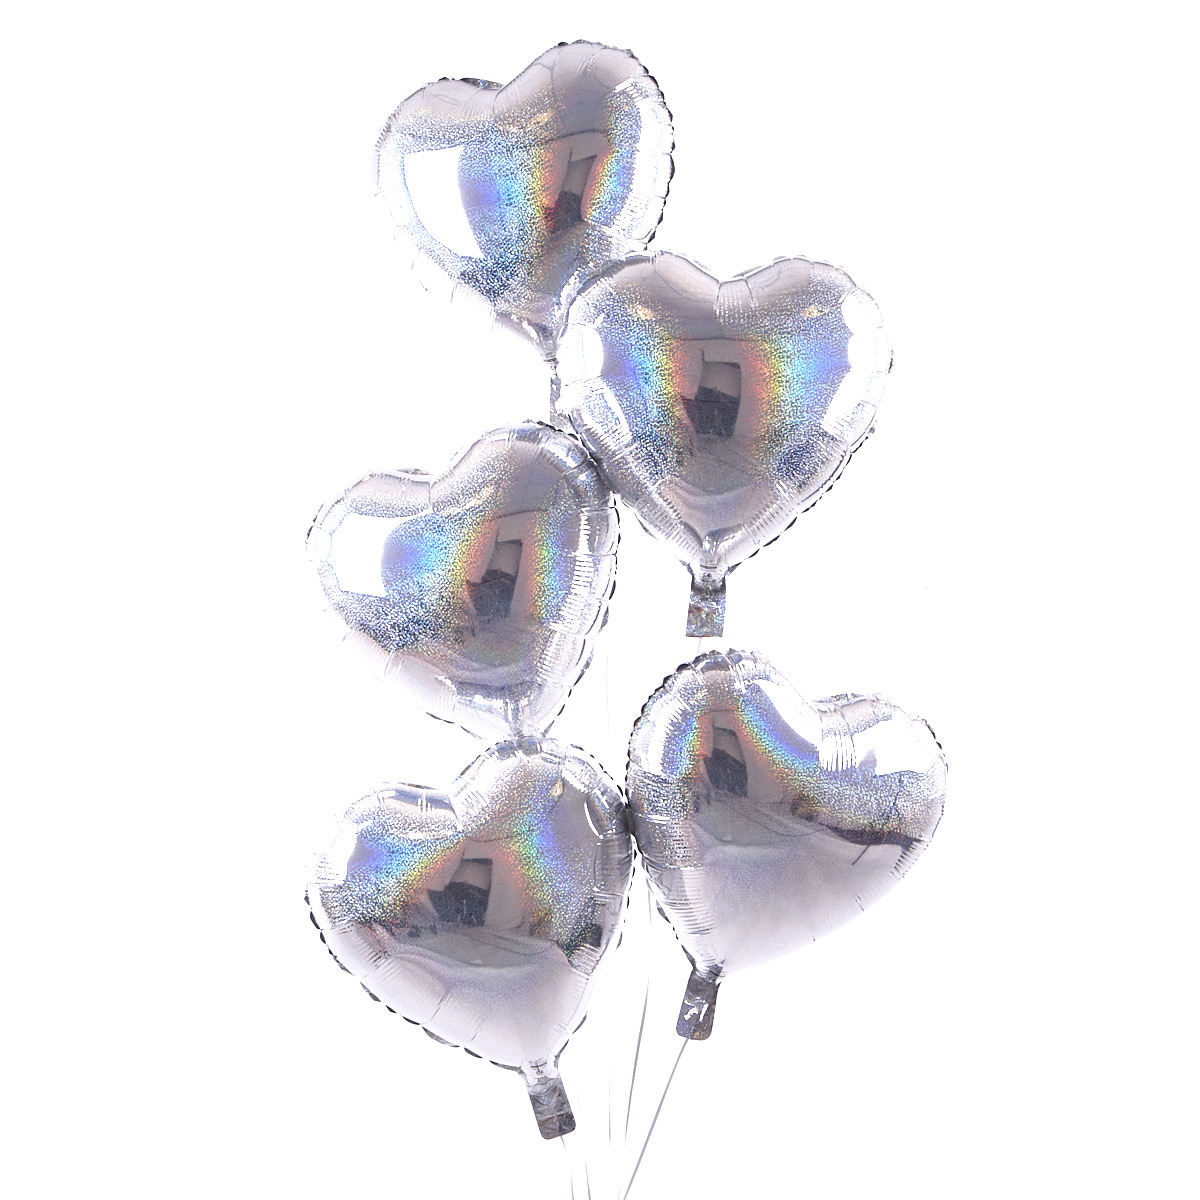 5 Silver Hearts Balloon Bouquet - DELIVERED INFLATED!